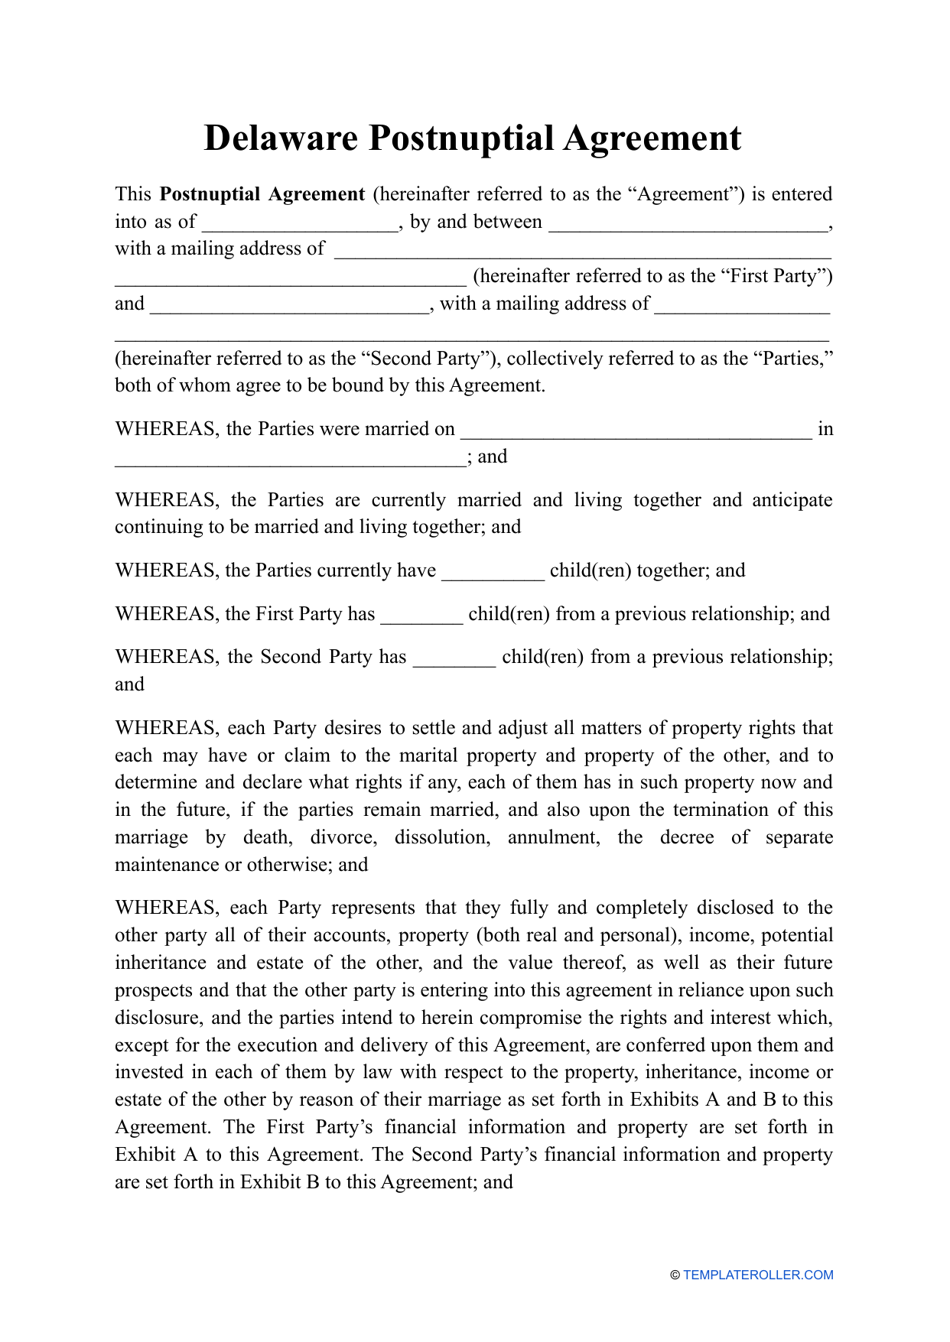 Postnuptial Agreement Template - Delaware, Page 1